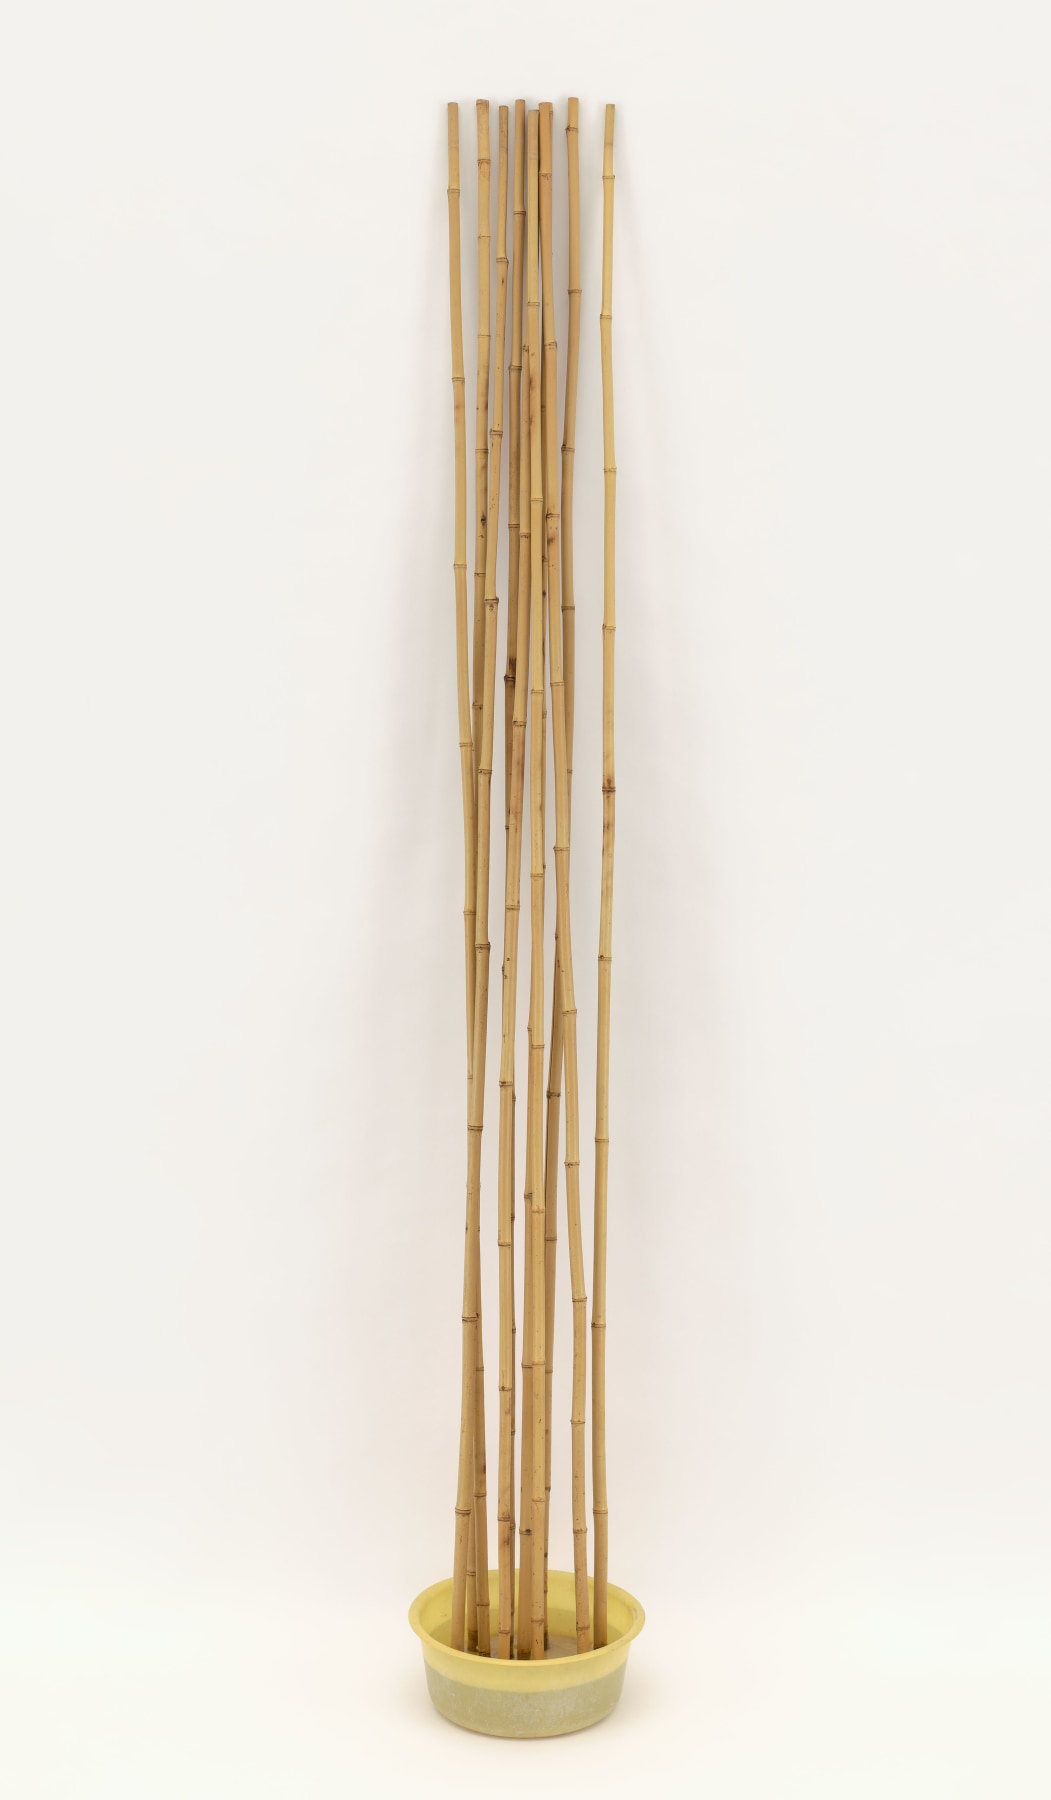 &quot;Attempt at Resuscitation of Bamboo Canes&quot;, 1967